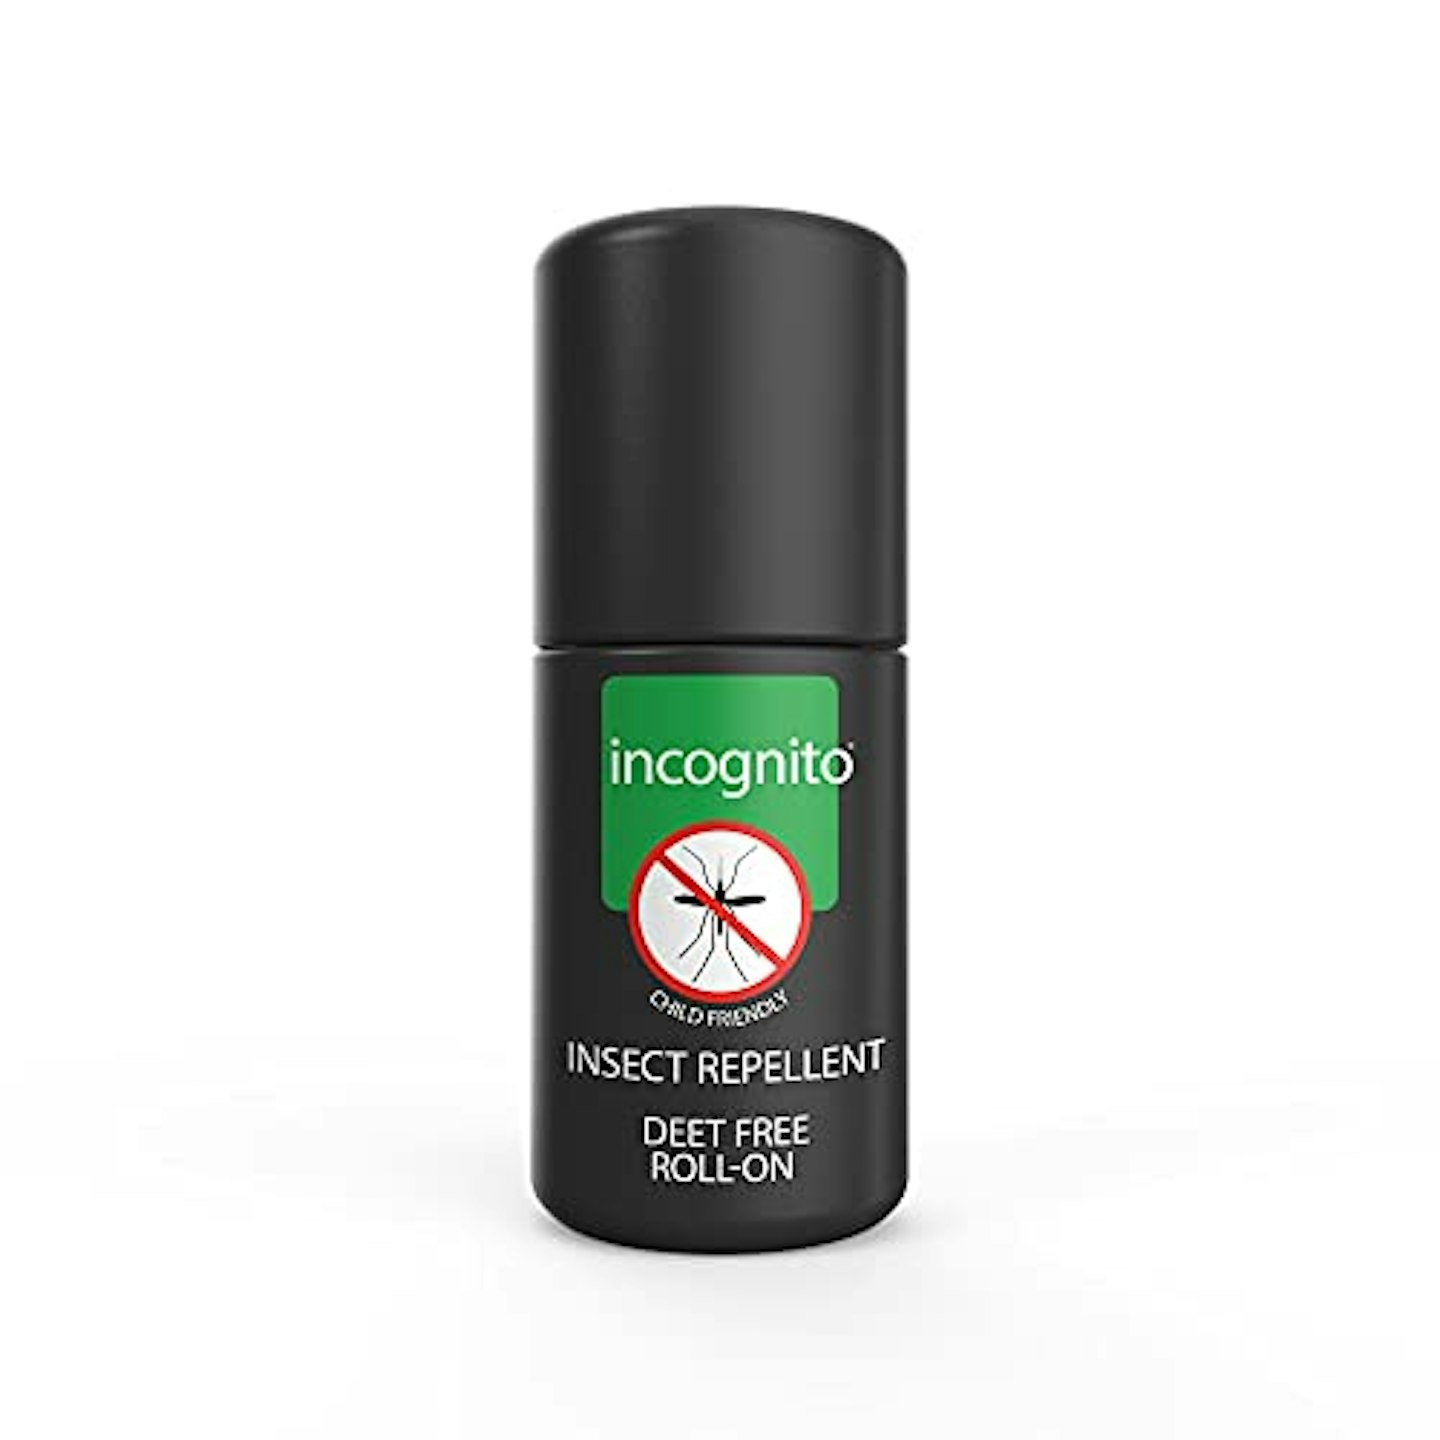  Incognito Insect Repellent Roll-on 50ml